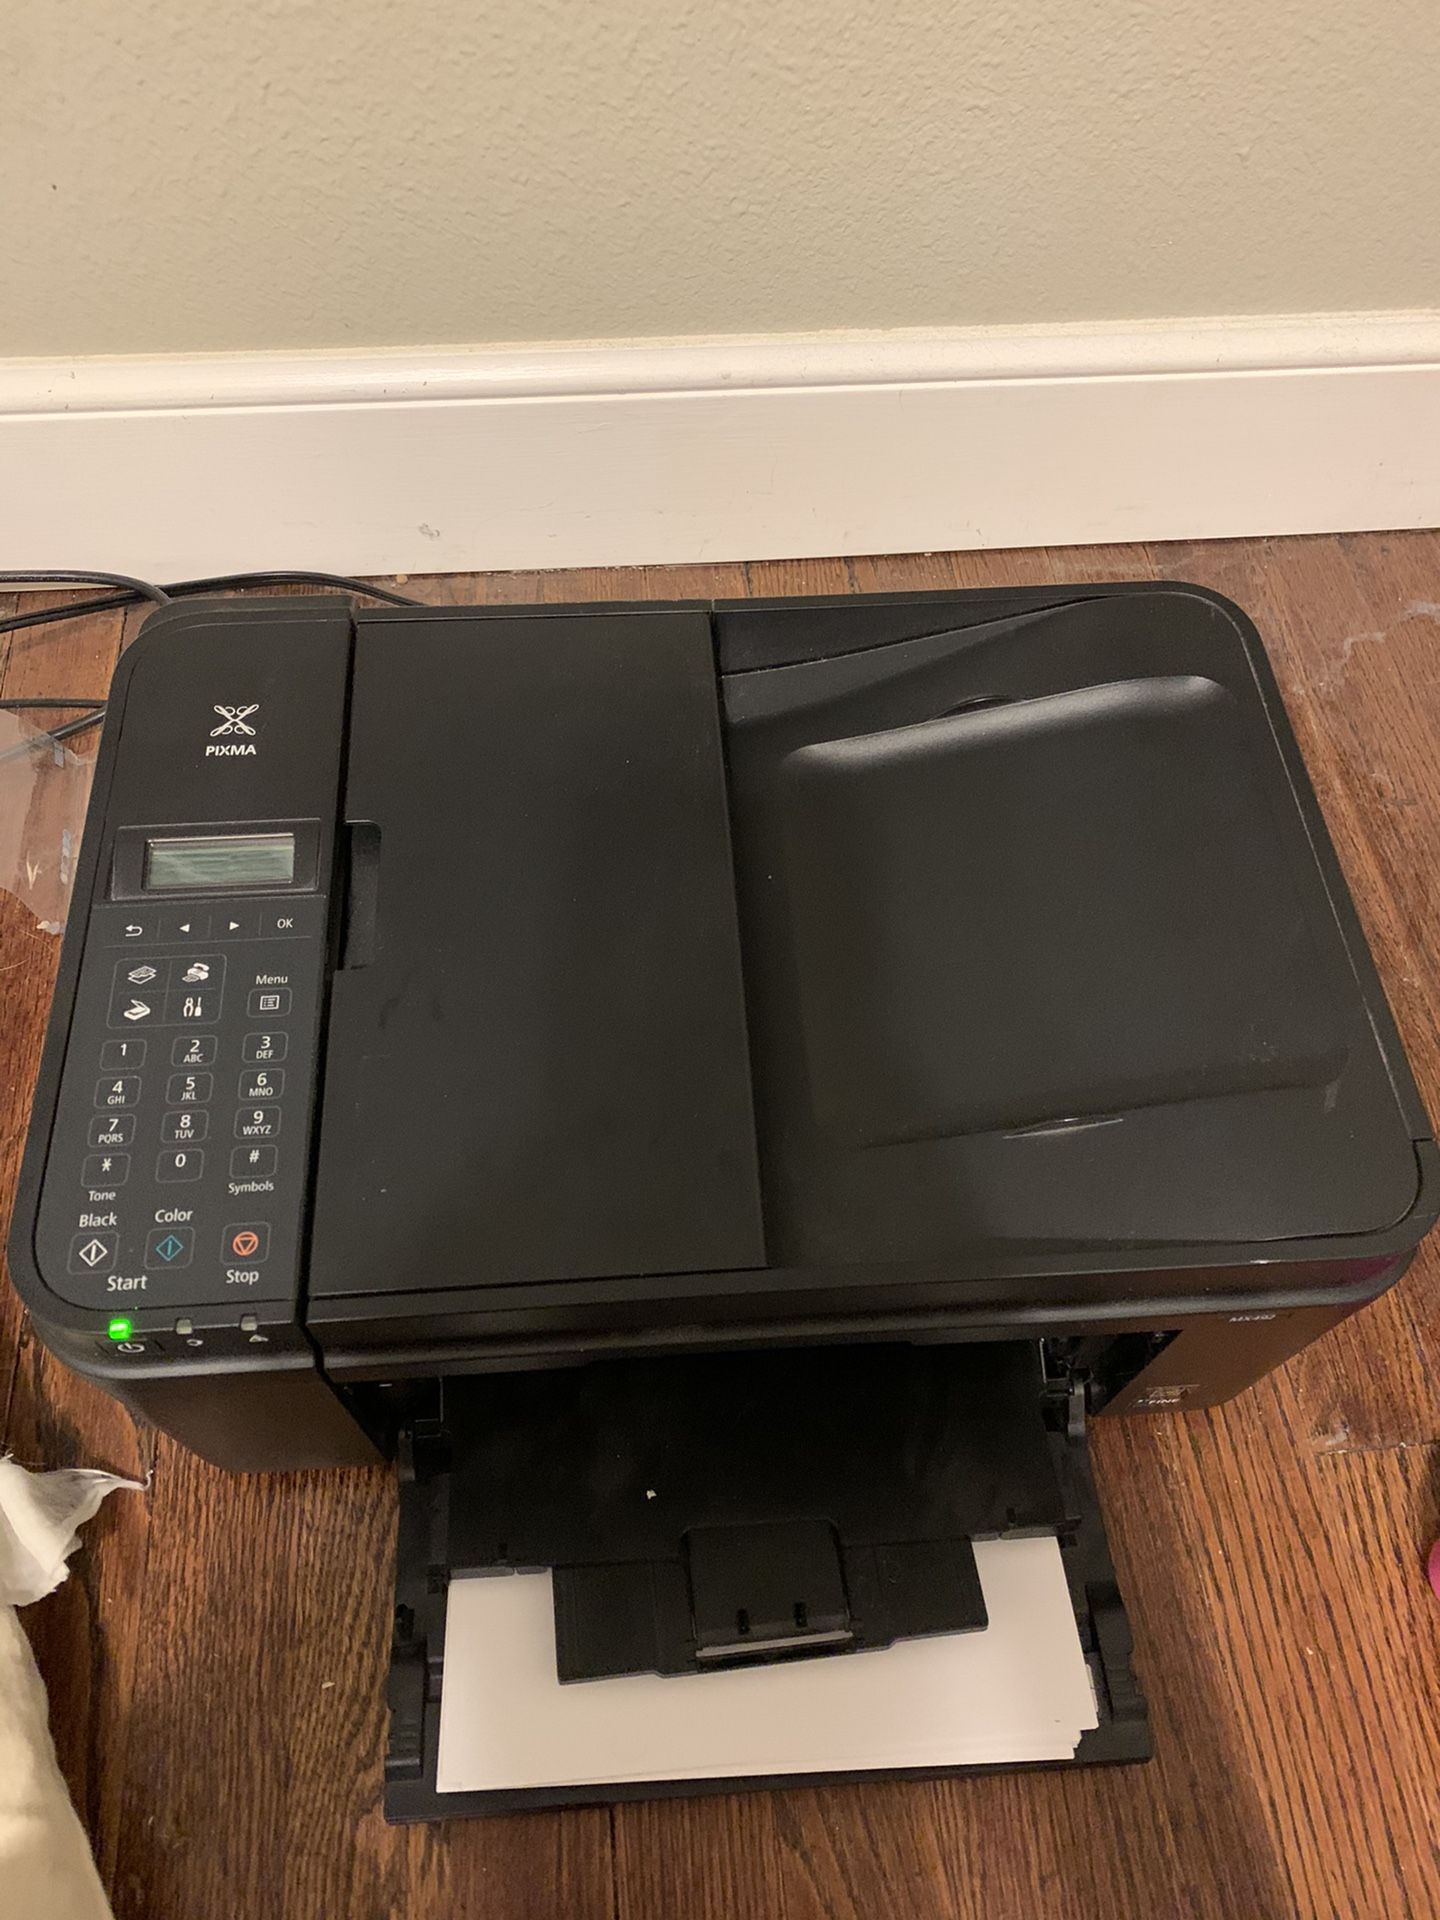 Cannon printer and scanner